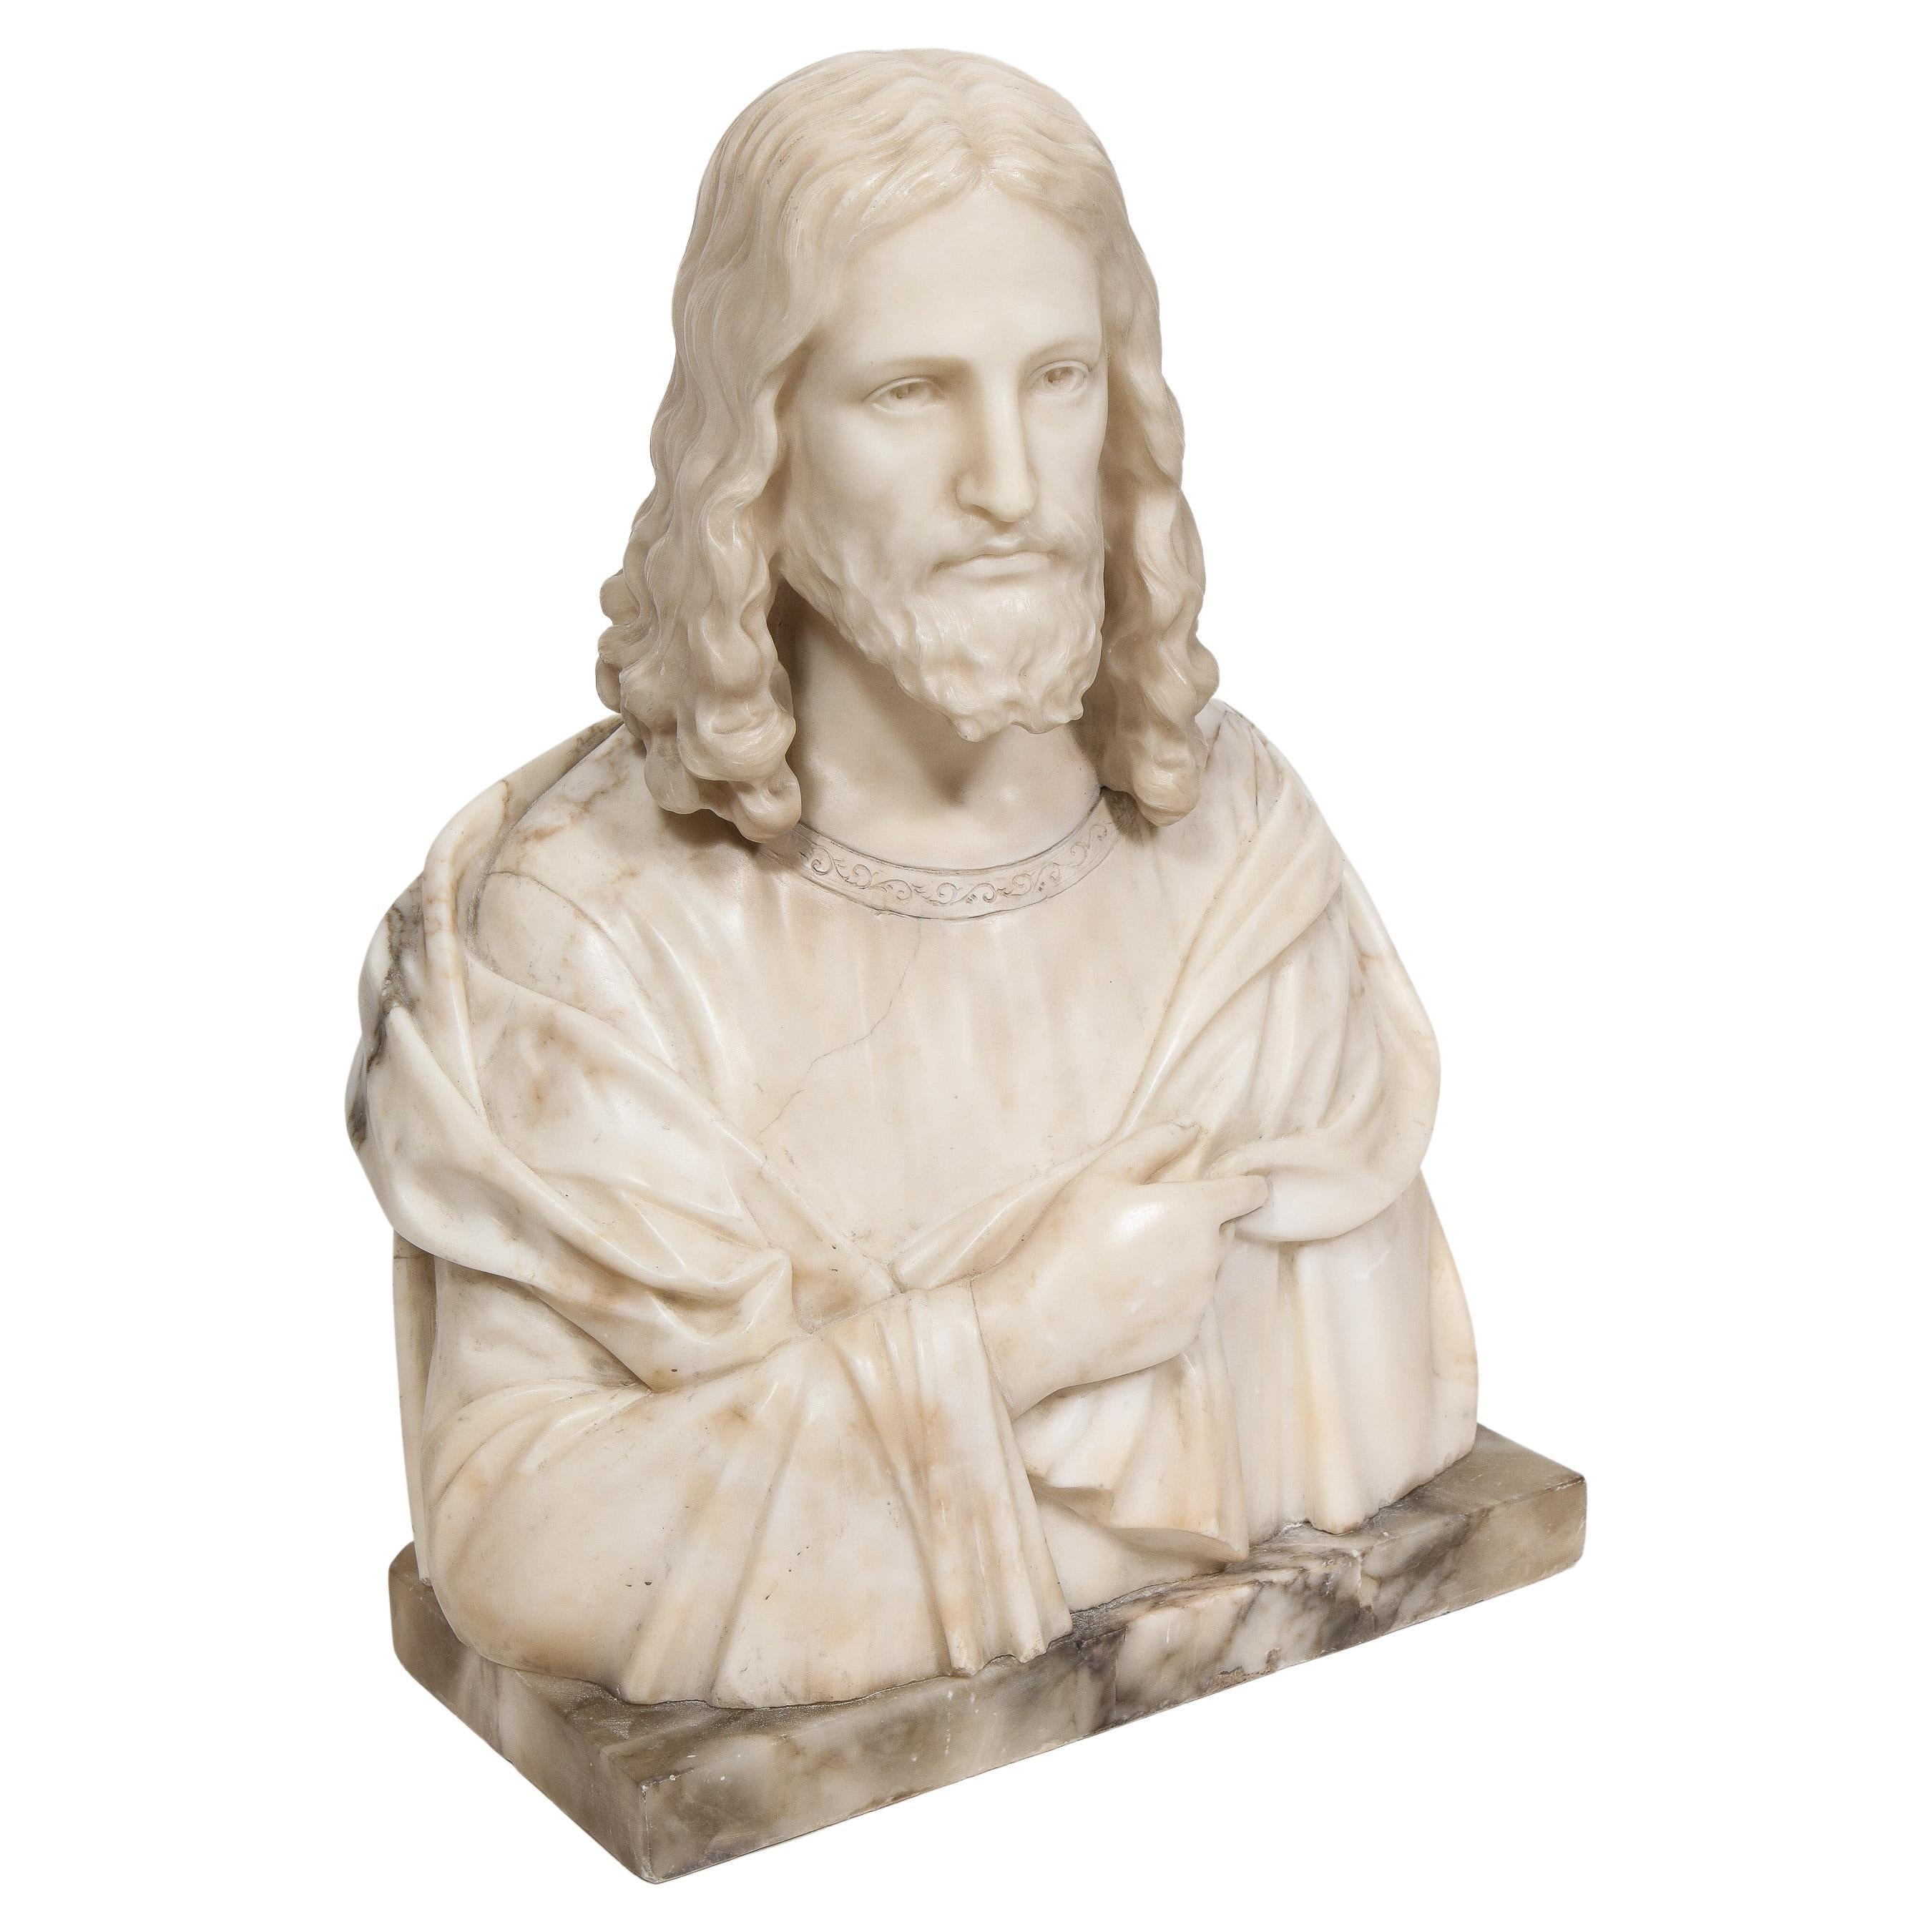 A magnificent Italian alabaster bust sculpture of Holy Jesus Christ by Guerrieri.

Realistically carved in Italy in the 19th century, a very powerful bust that would fit any home, church, library or office. 

Signed to the back.

Measures: 21